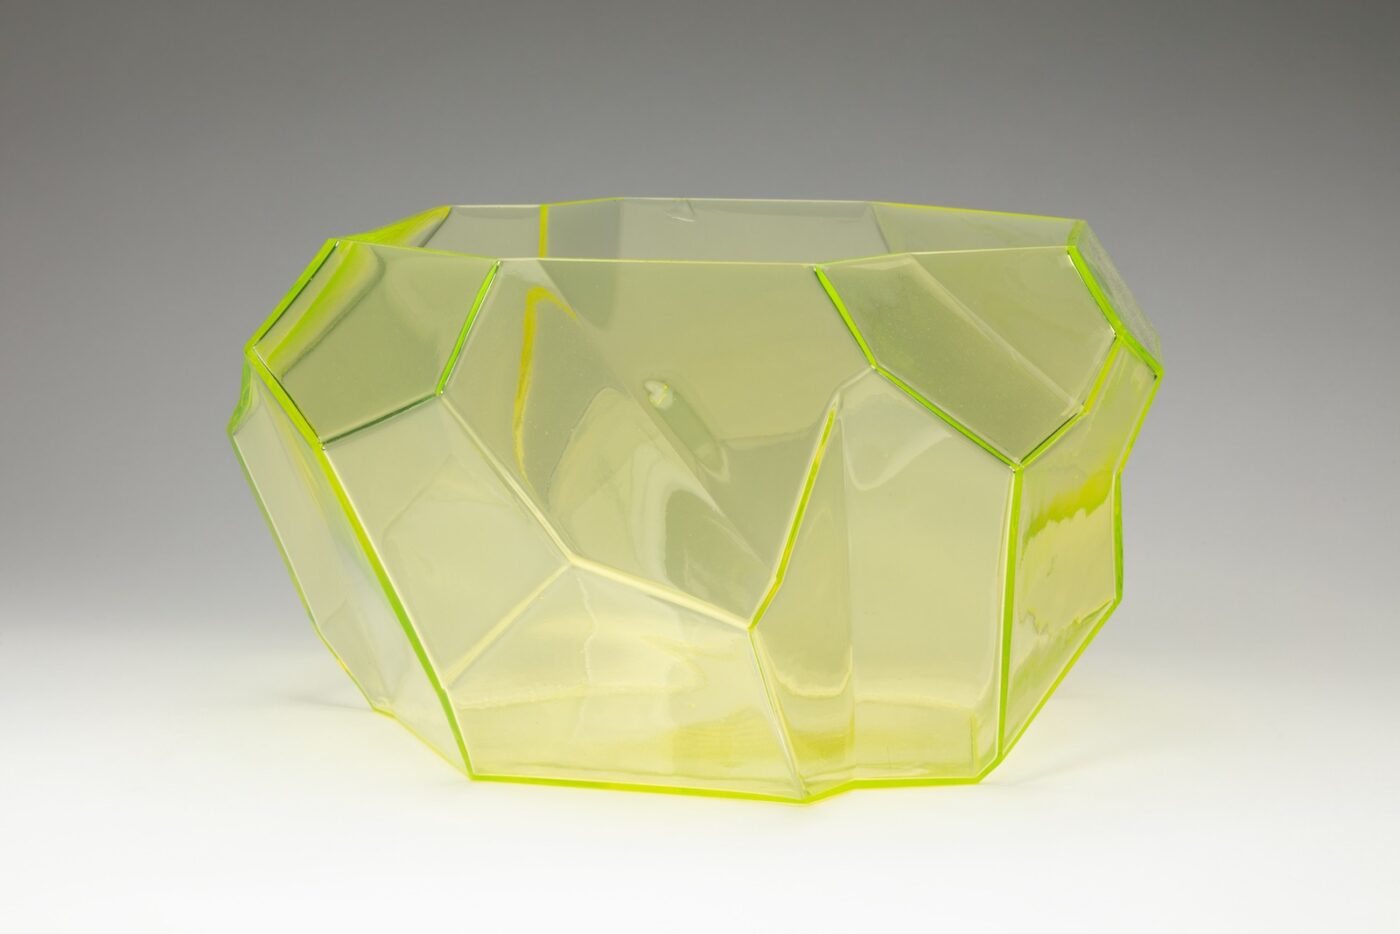 Translucent yellow glass bowl with geometric sides of different shapes and sizes.